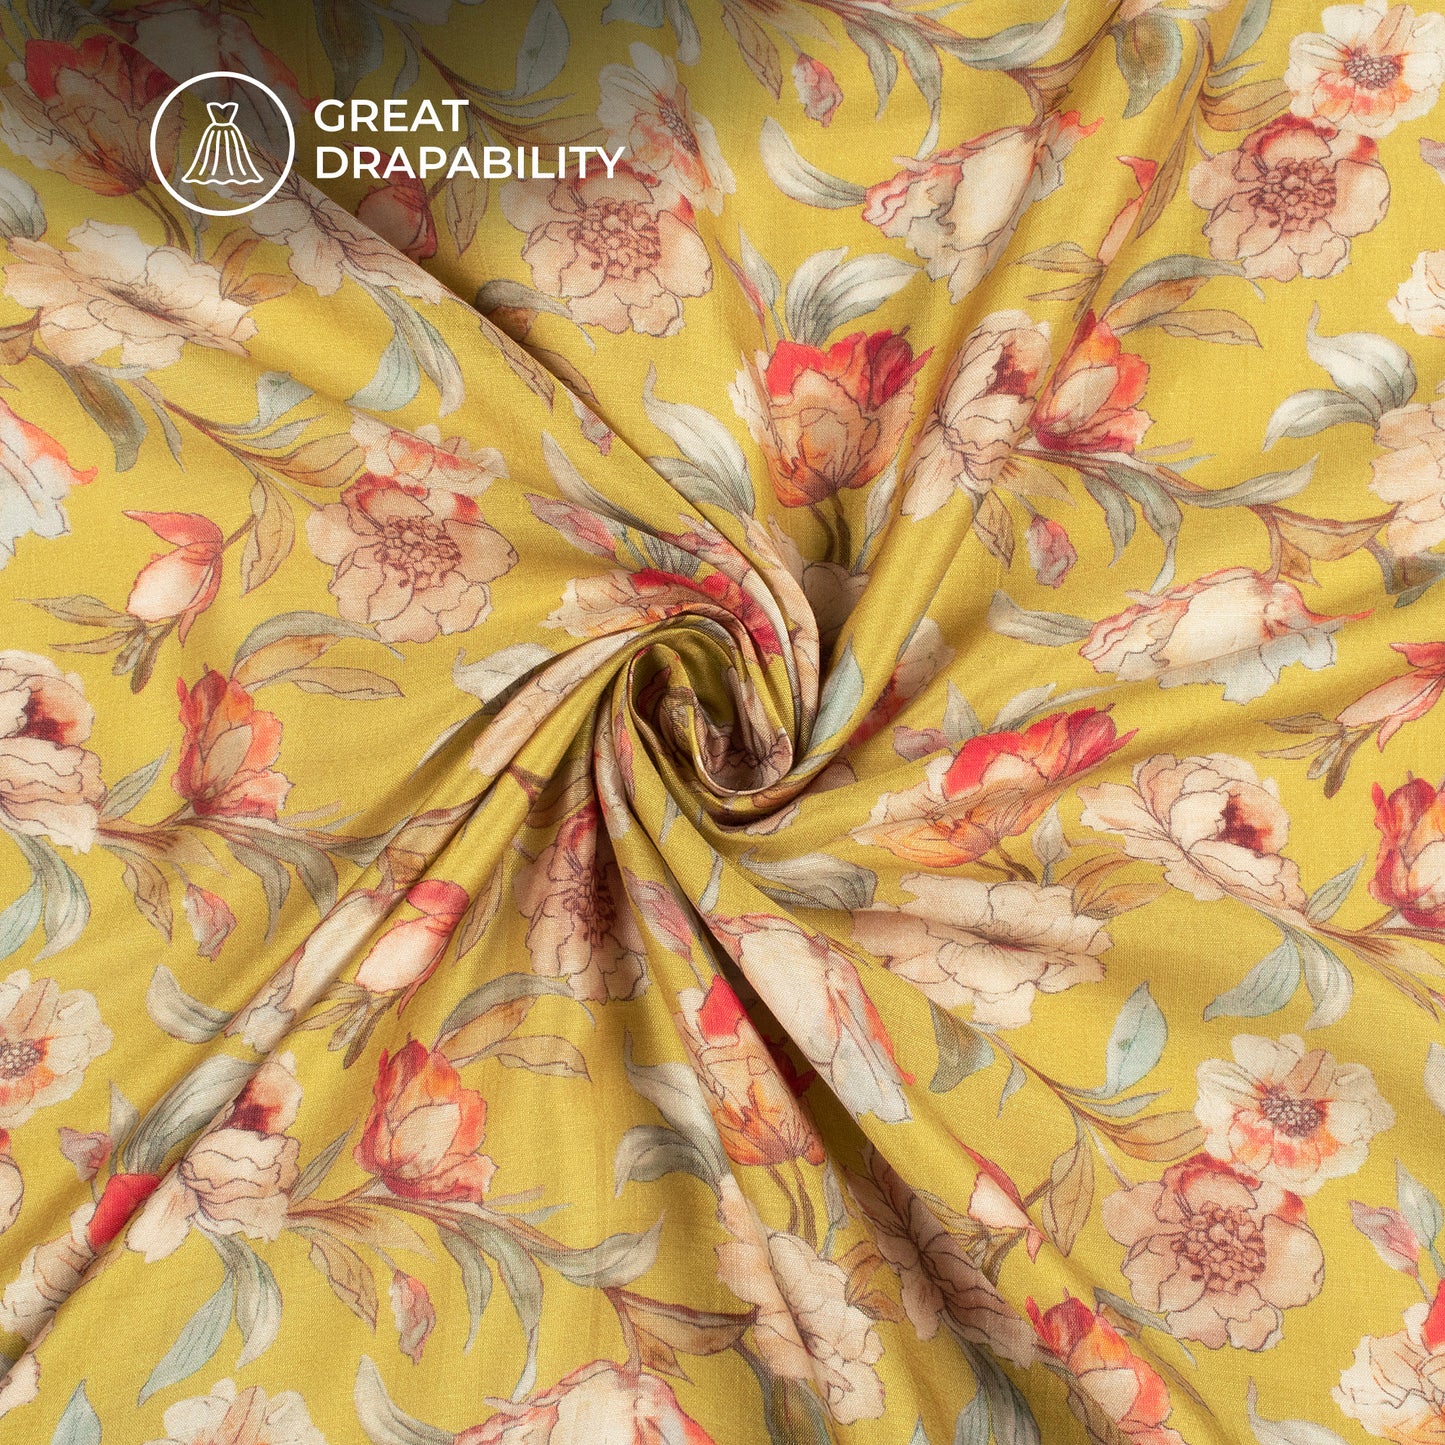 Butter Yellow Floral Printed Sustainable Orange Fabric